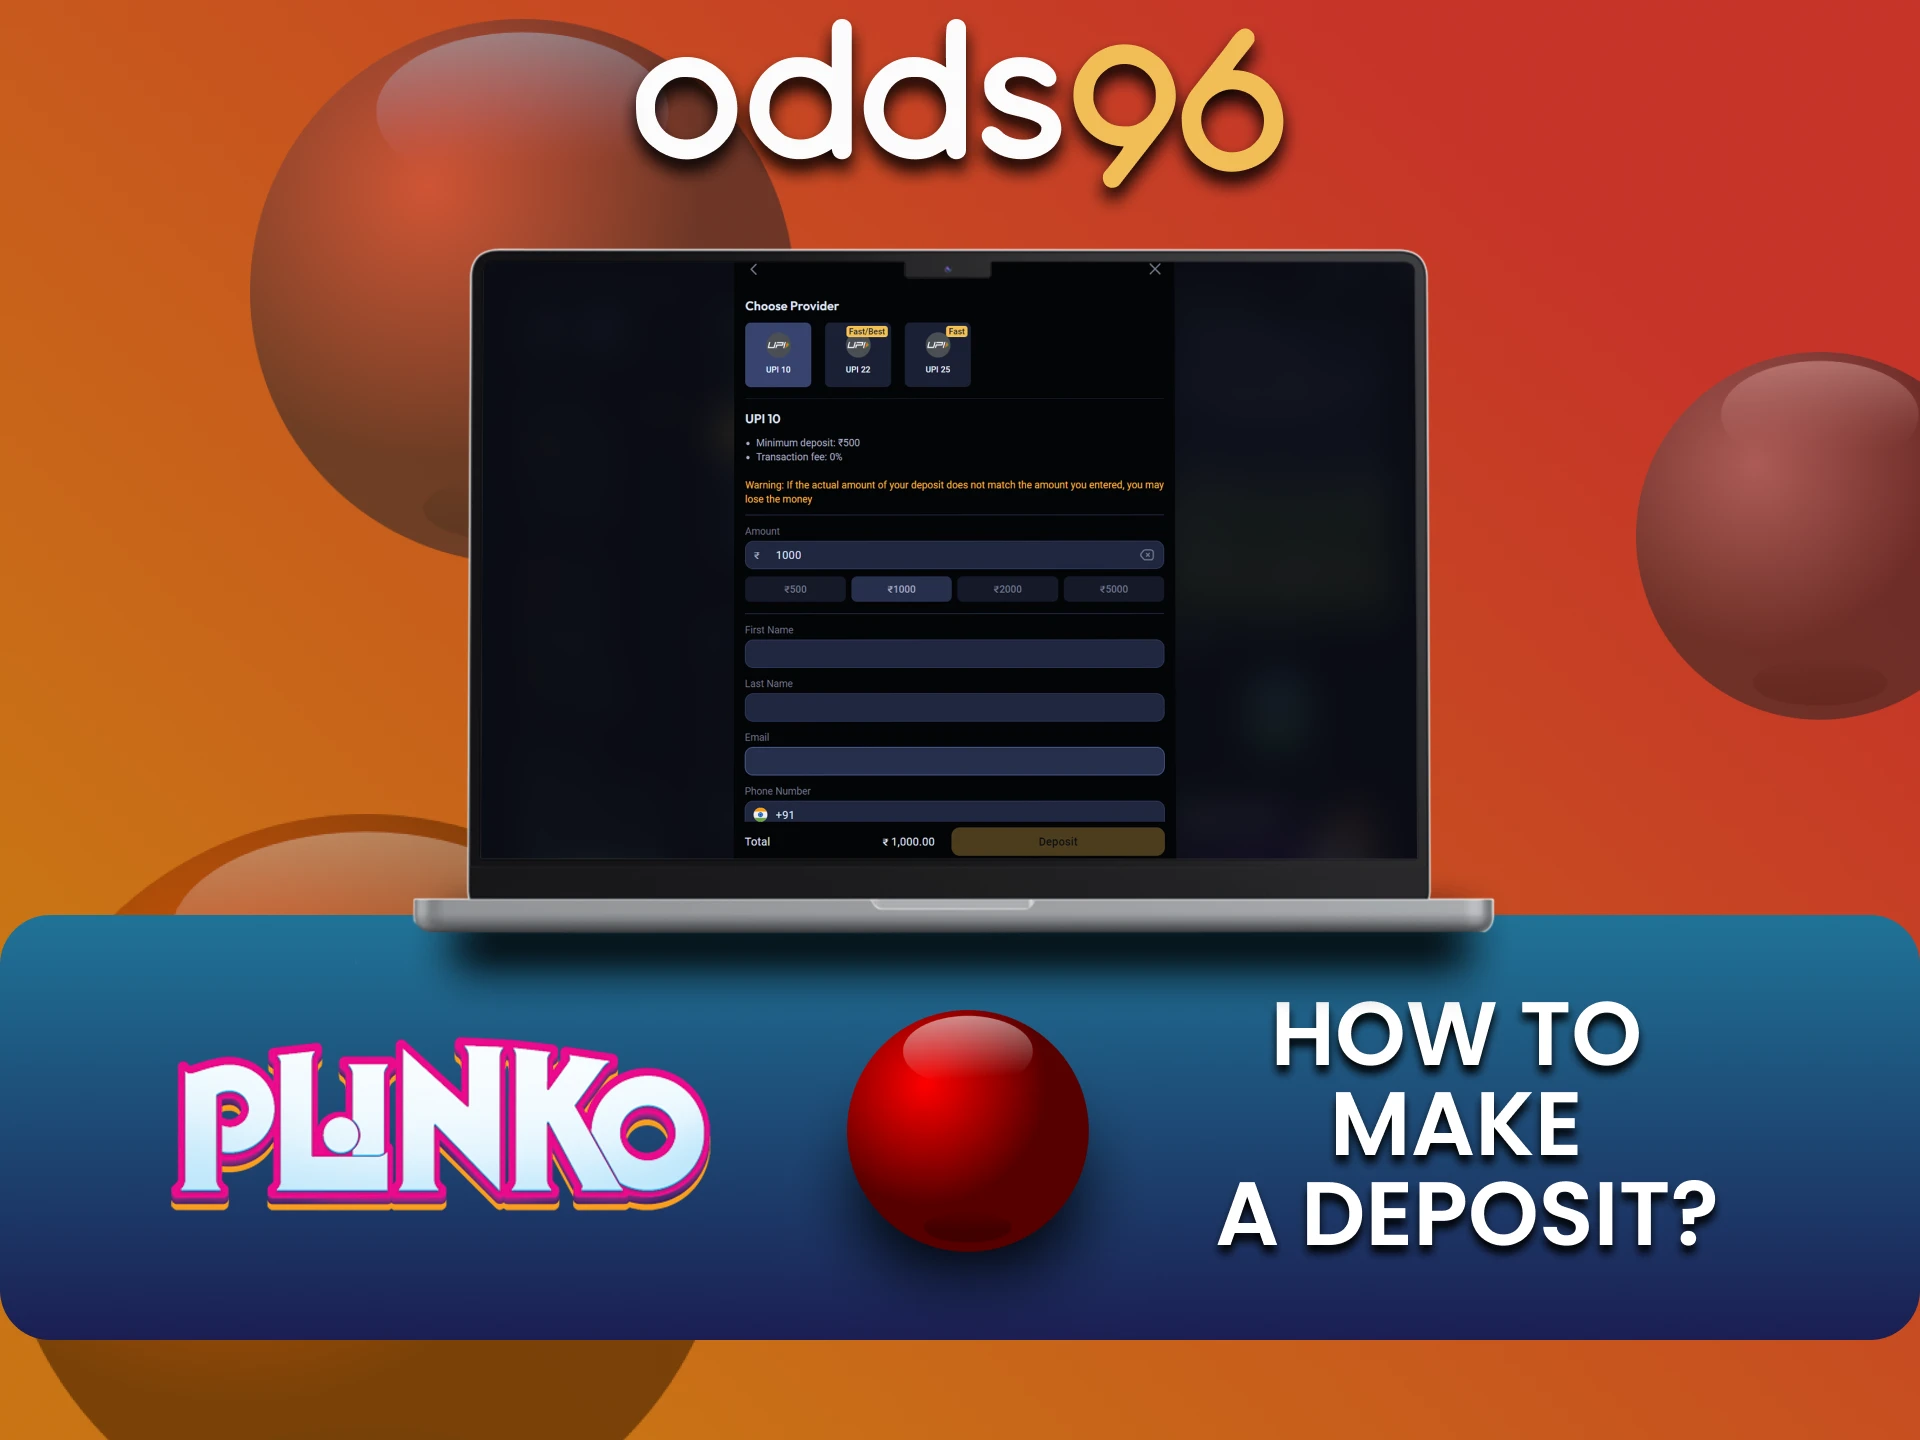 We will tell you about the ways to replenish funds on odds96 for Plinko.